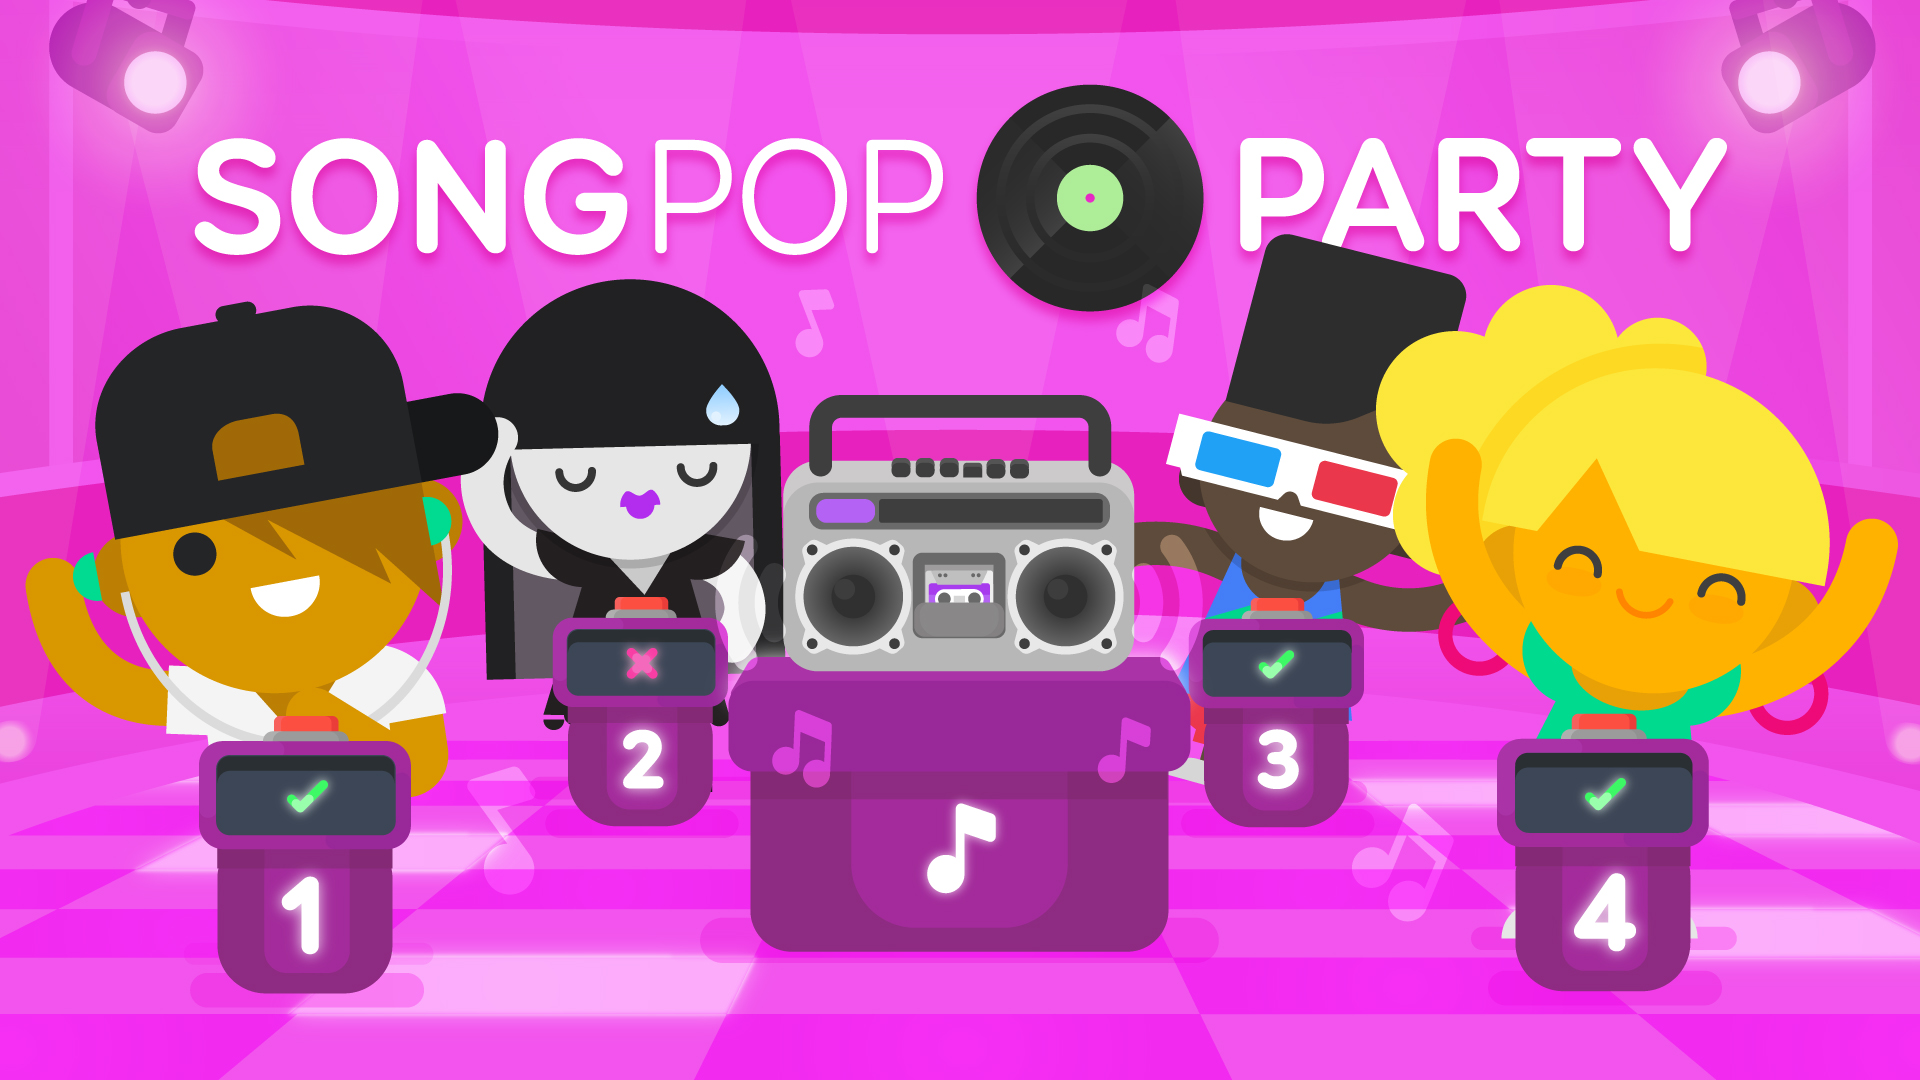 Video For Get the Party Started in SongPop Party